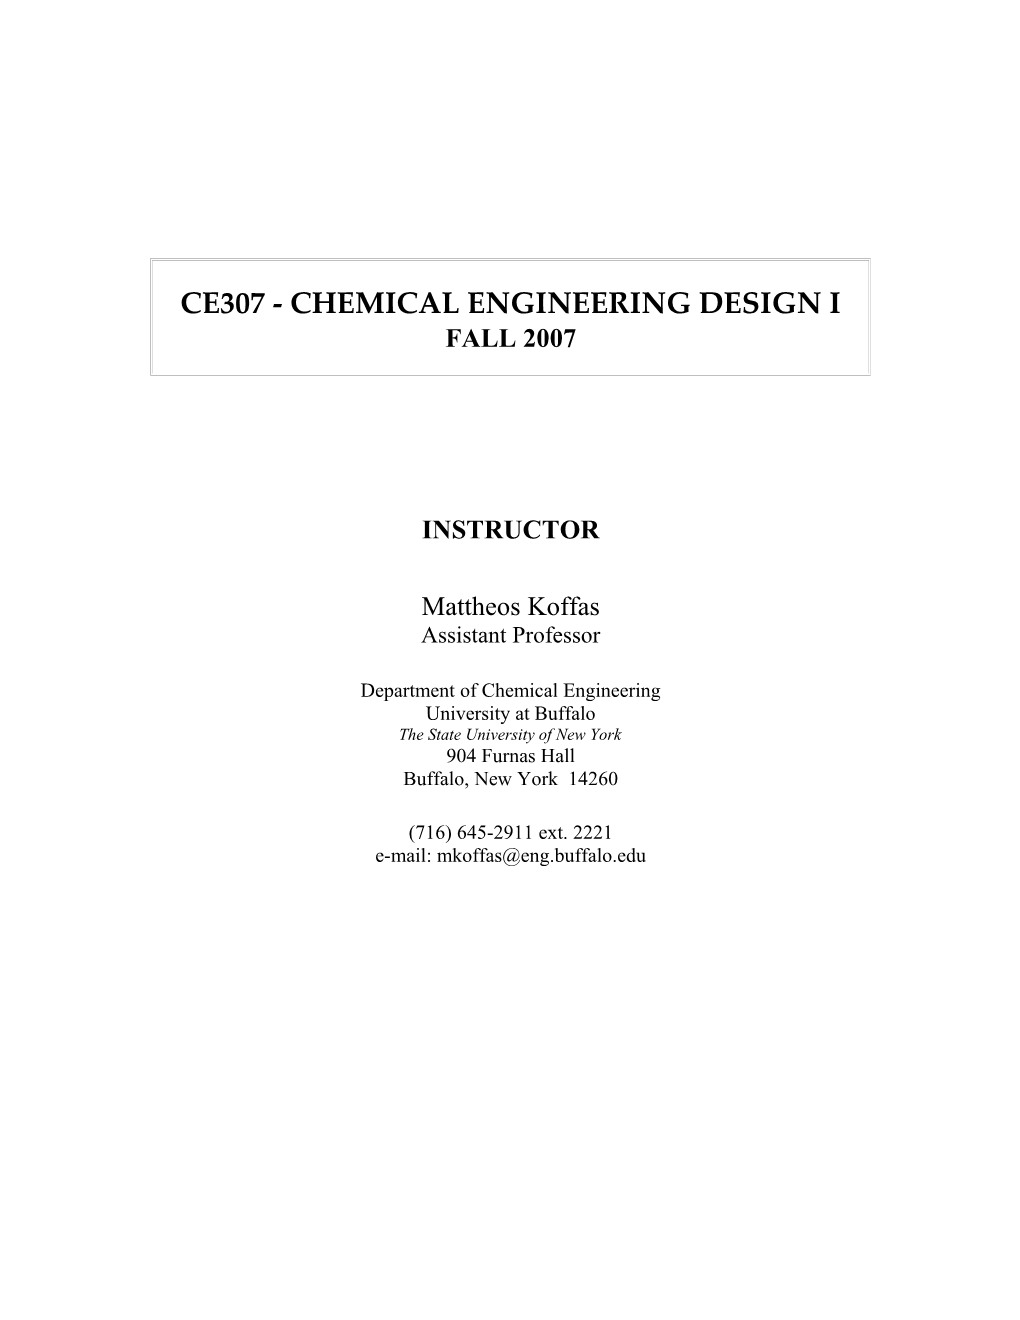 Ce307 - Chemical Engineering Design I